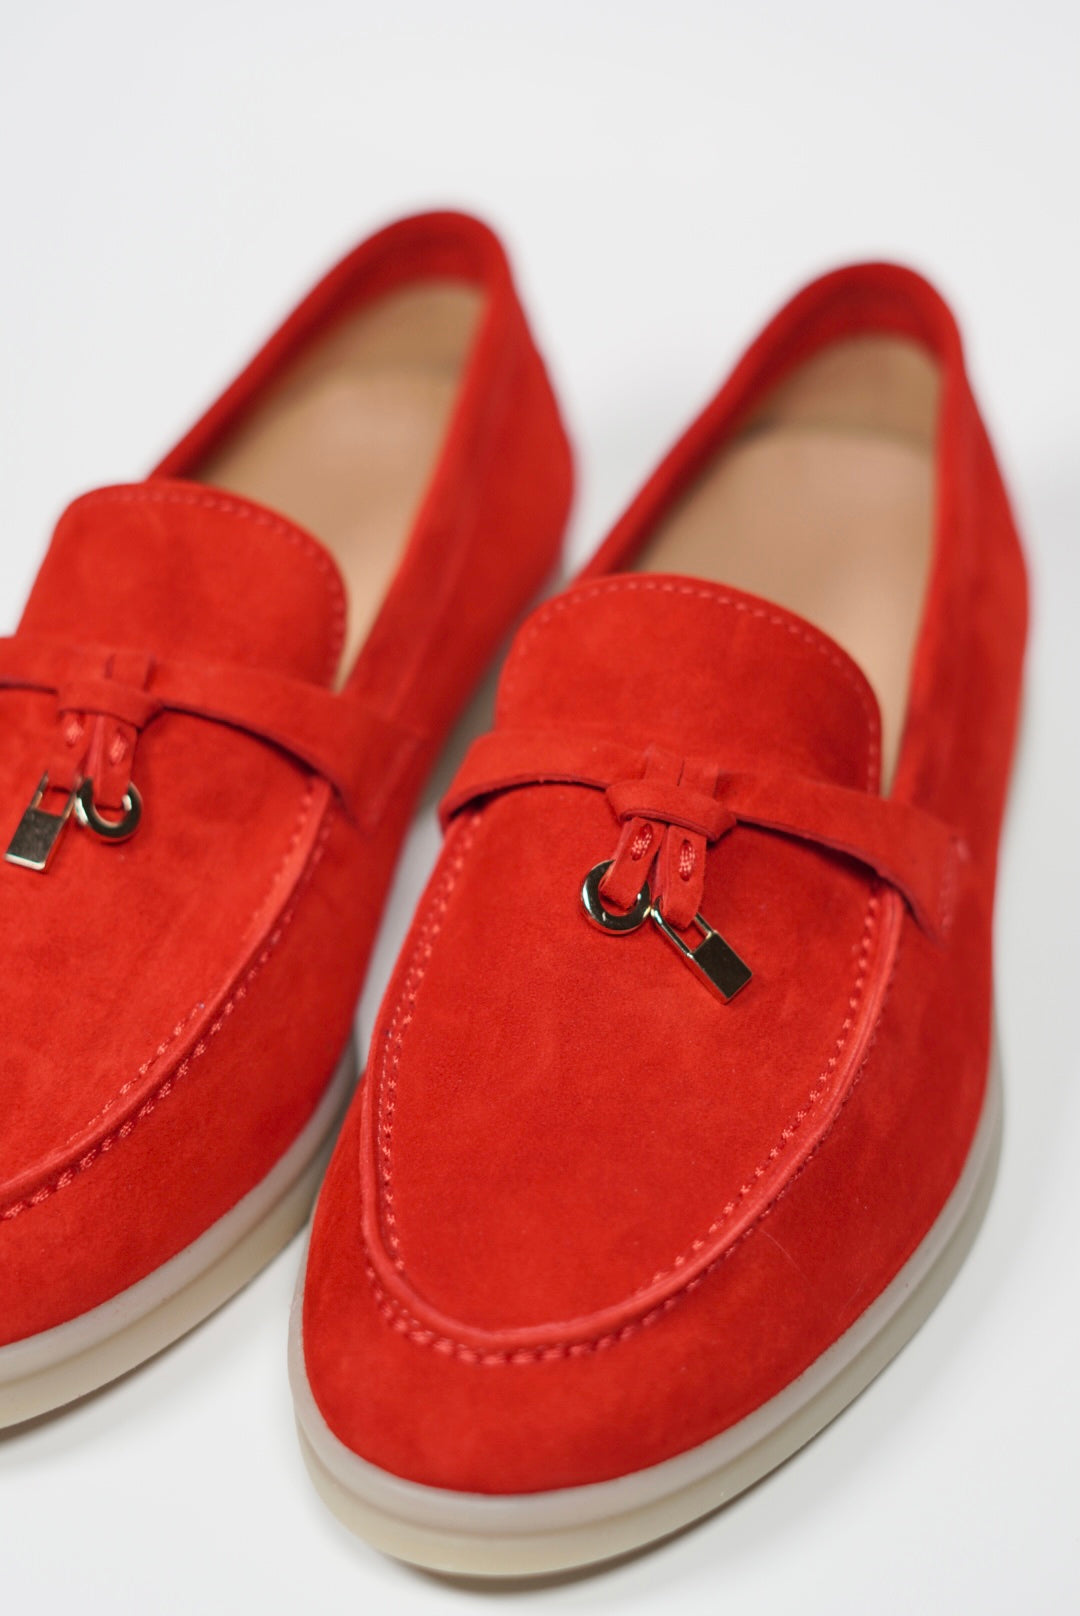 Women's Genuine Suede Loafers Moccasins Red